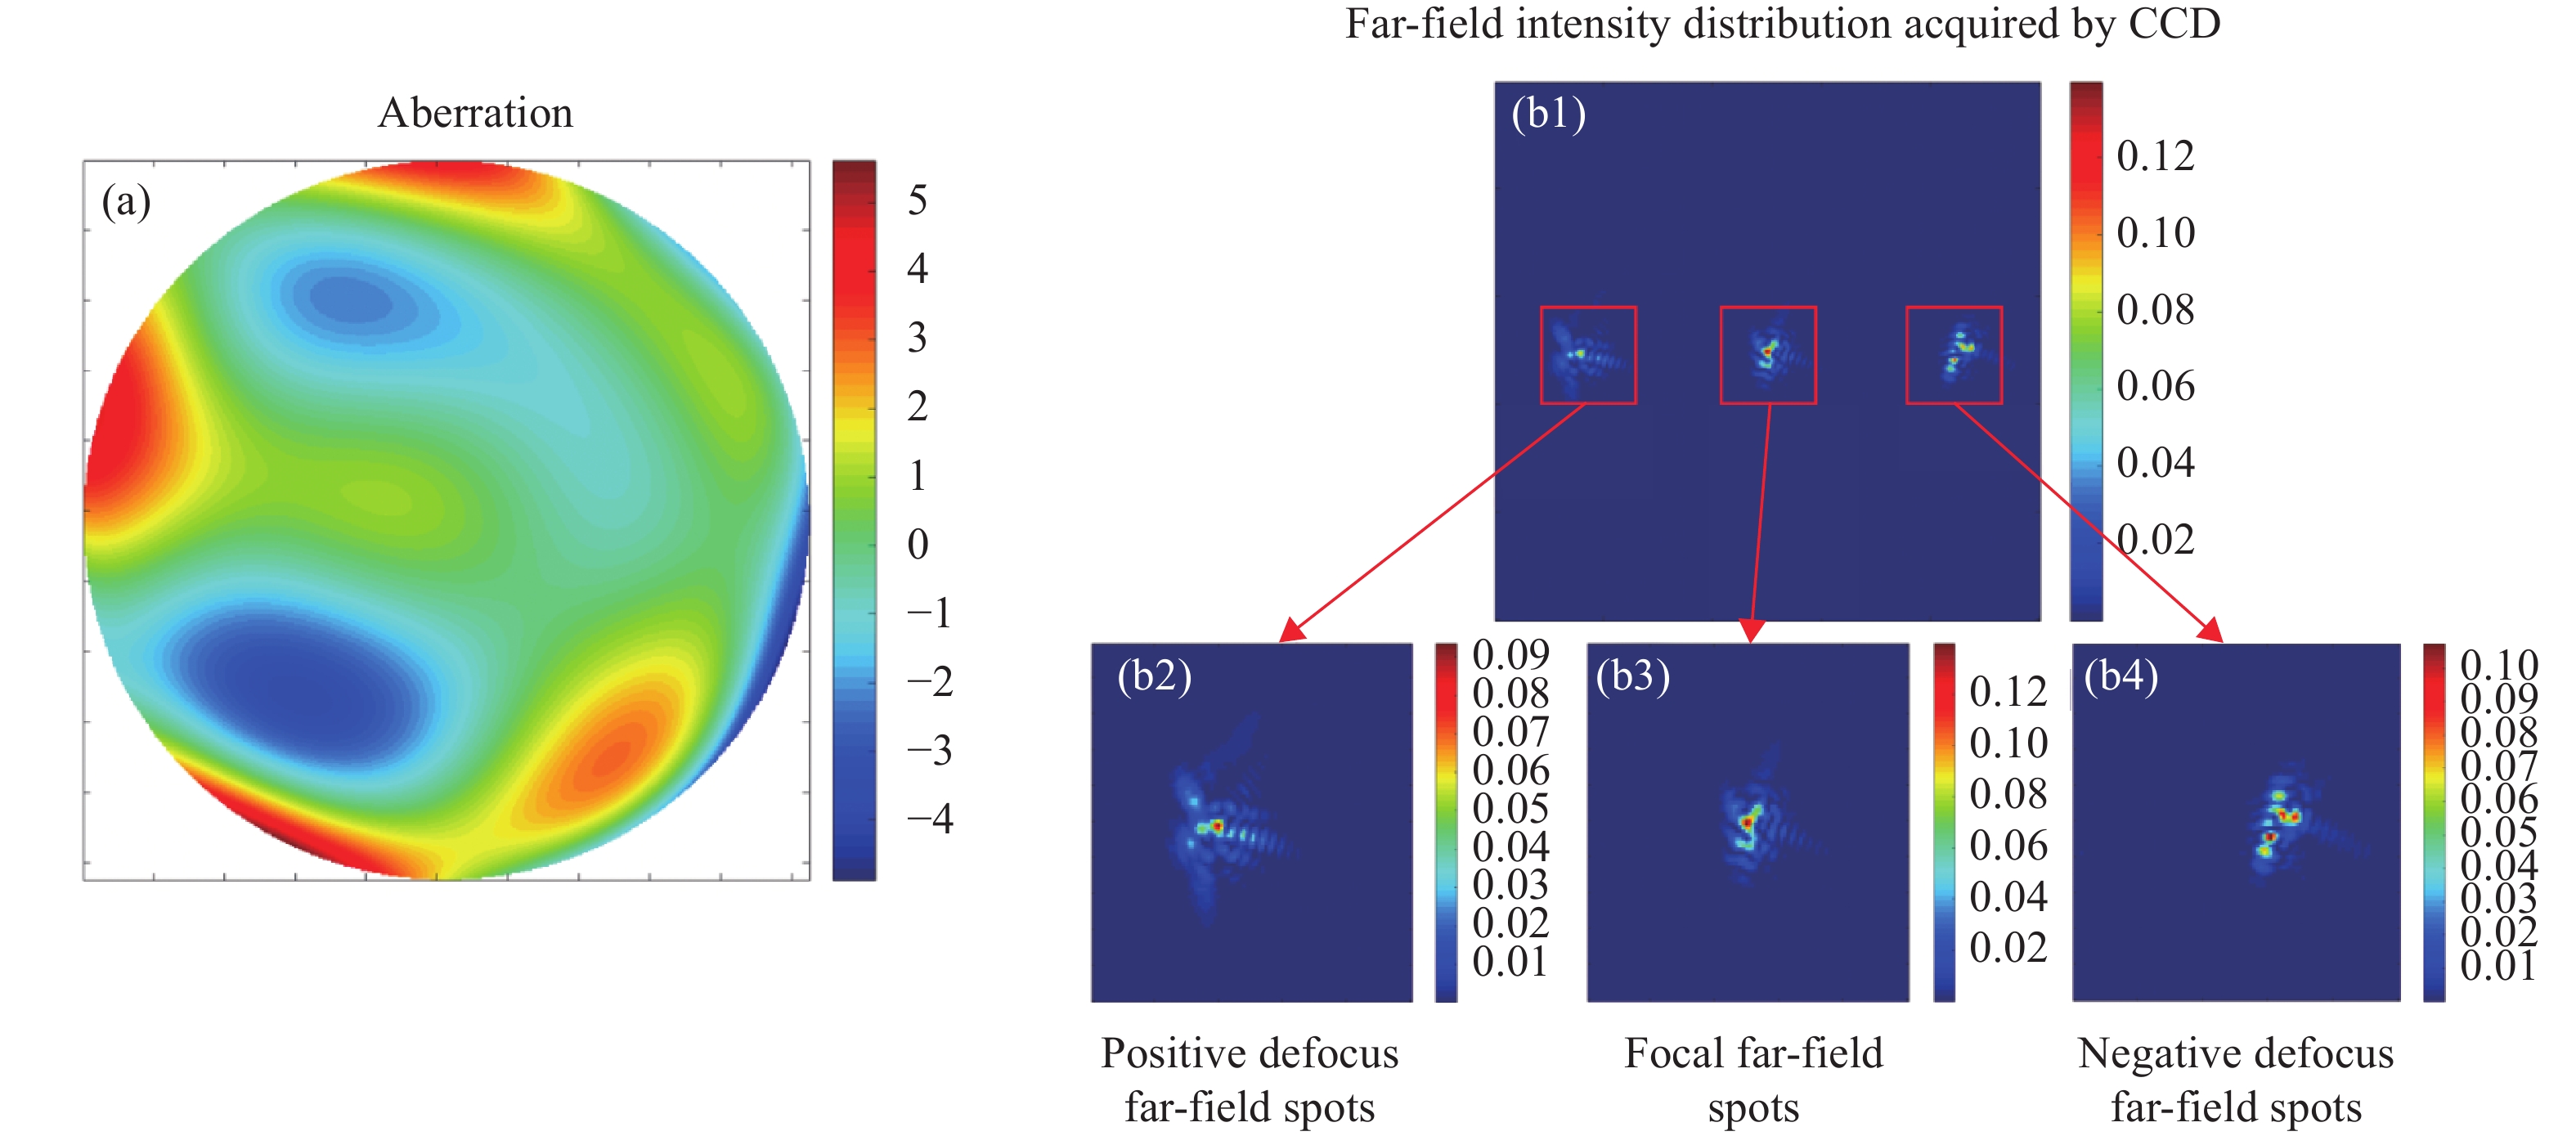 Far-field intensity distribution acquired by CCD (b1) and corresponding positive defocus spots (b2), focal plane spots (b3), negative defocus spots (b4) when incident aberration is (a)